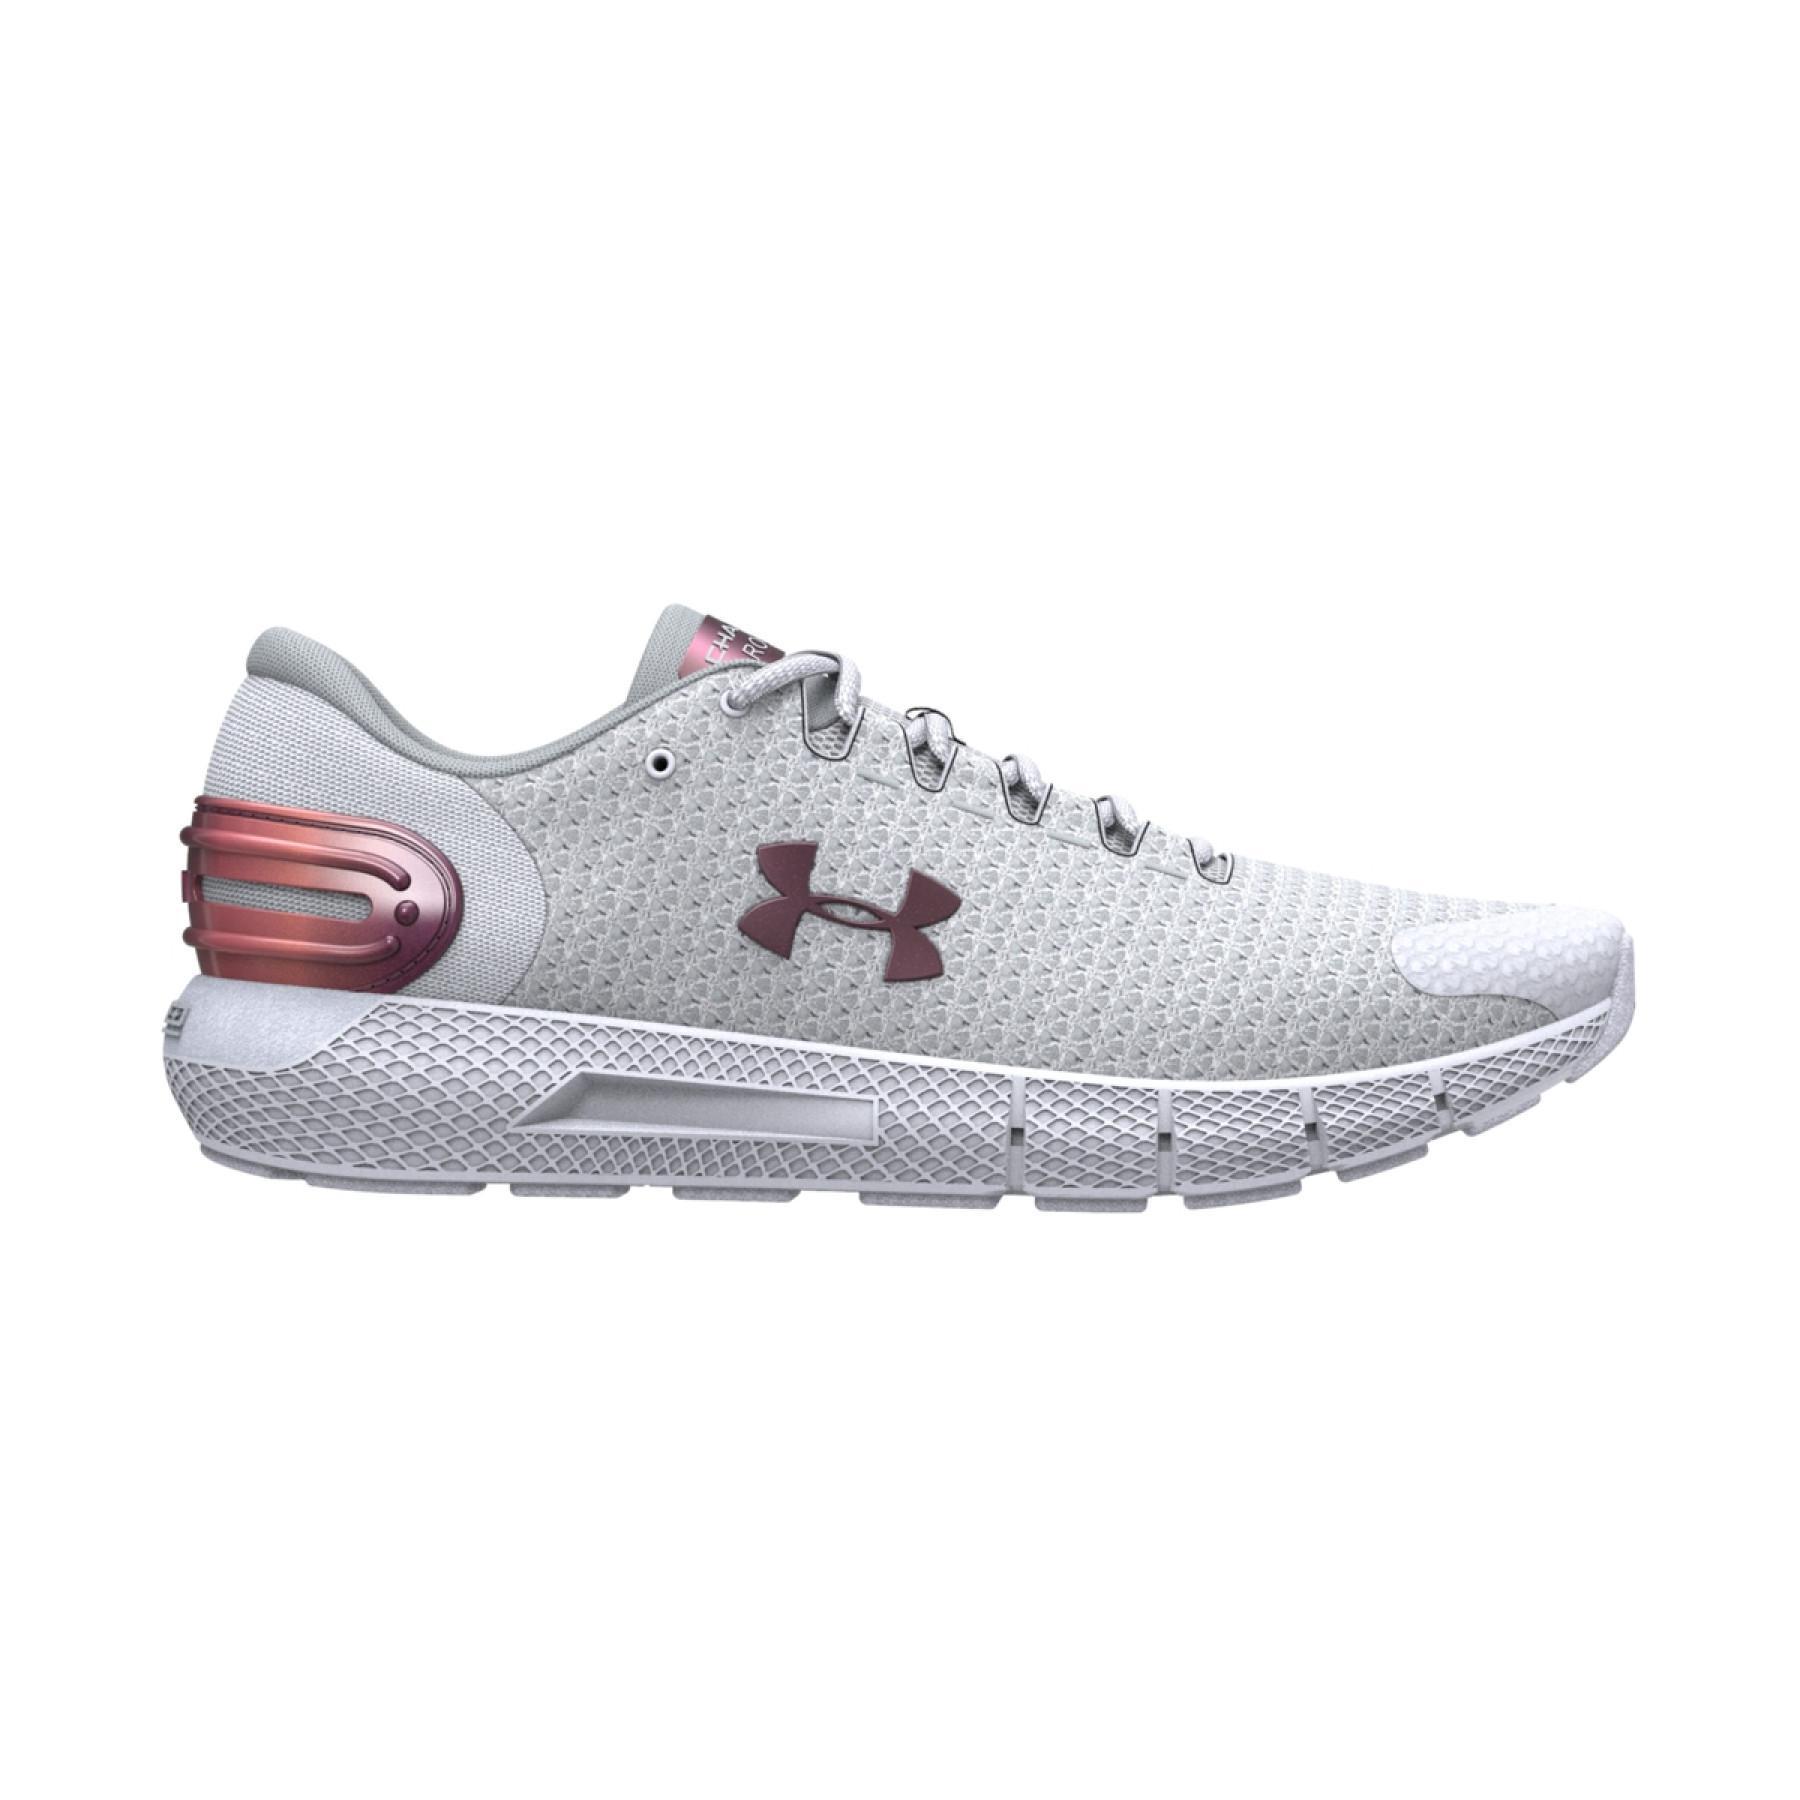 Under Armour Womens Charged Rogue 2.5 Running Shoe